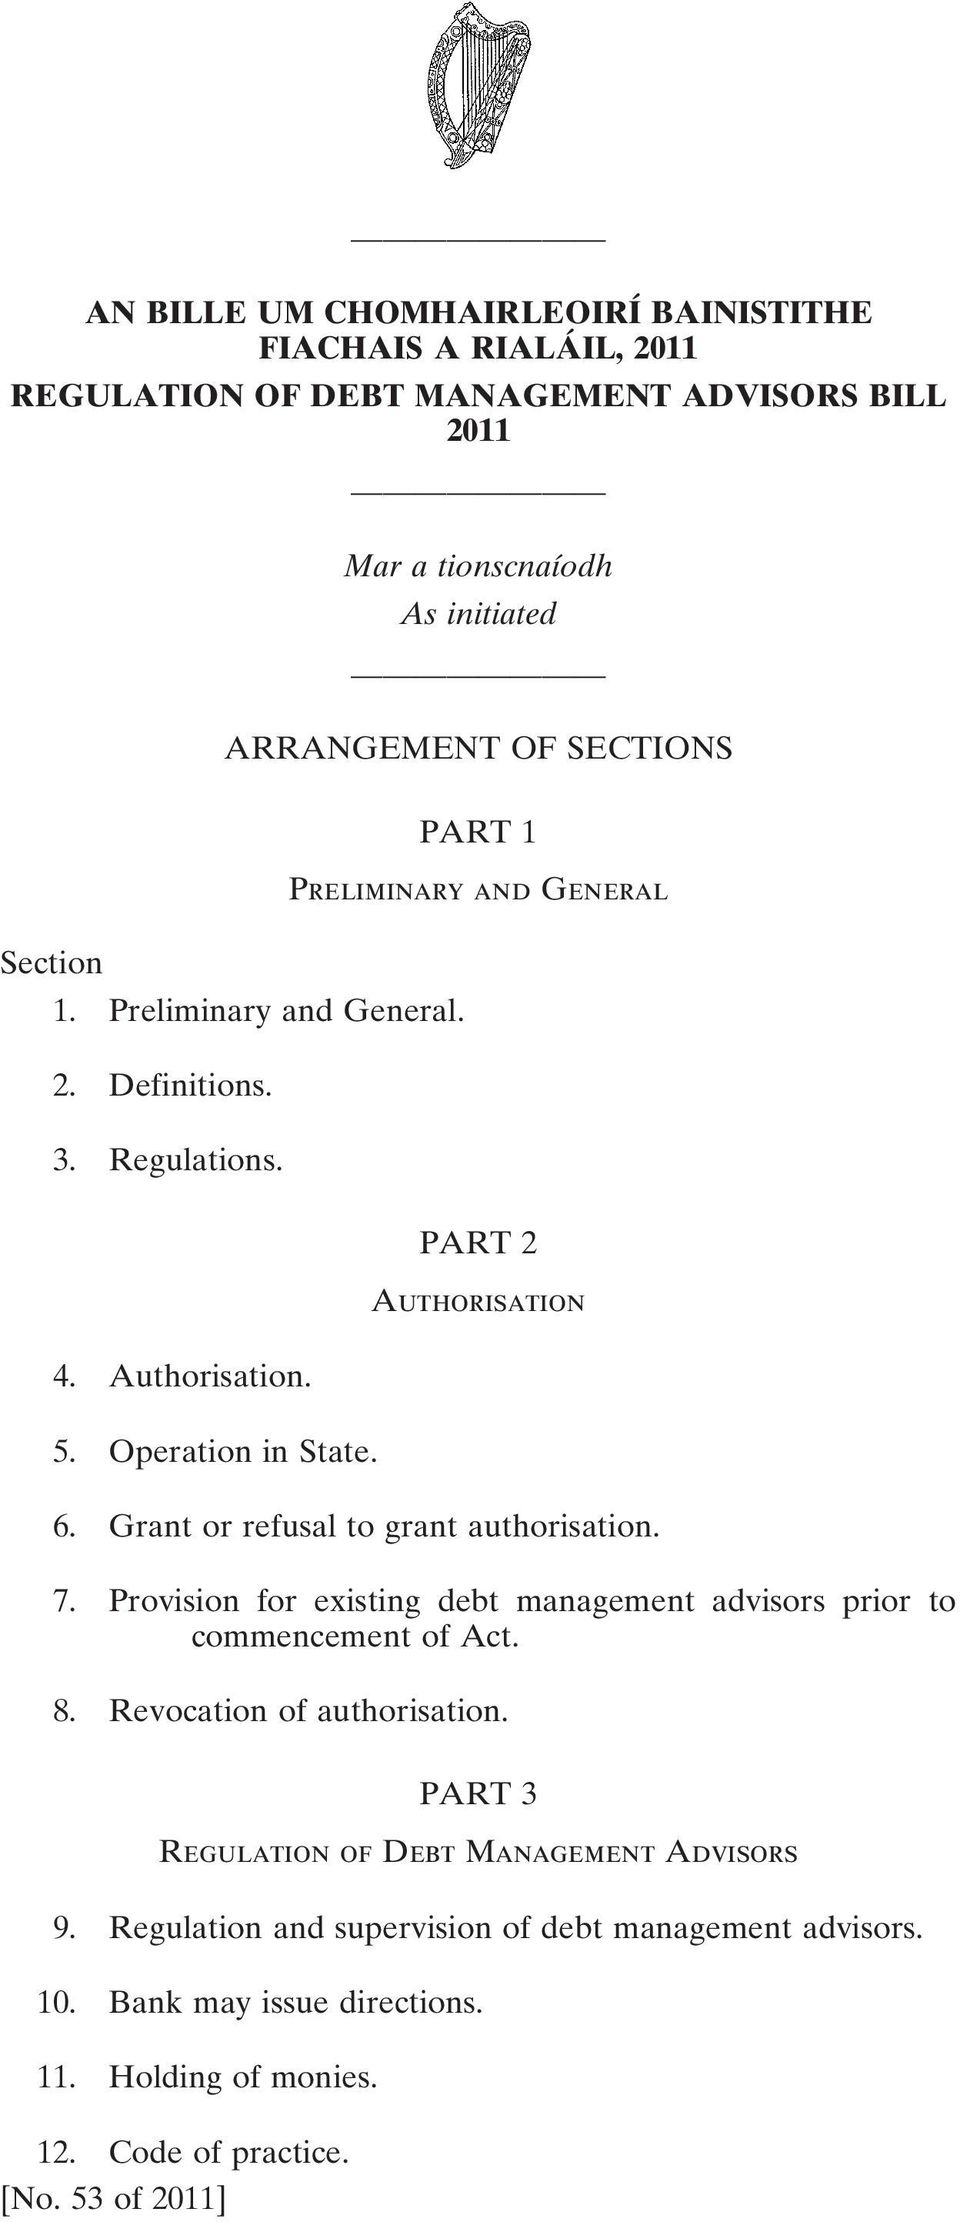 Grant or refusal to grant authorisation. 7. Provision for existing debt management advisors prior to commencement of Act. 8. Revocation of authorisation.